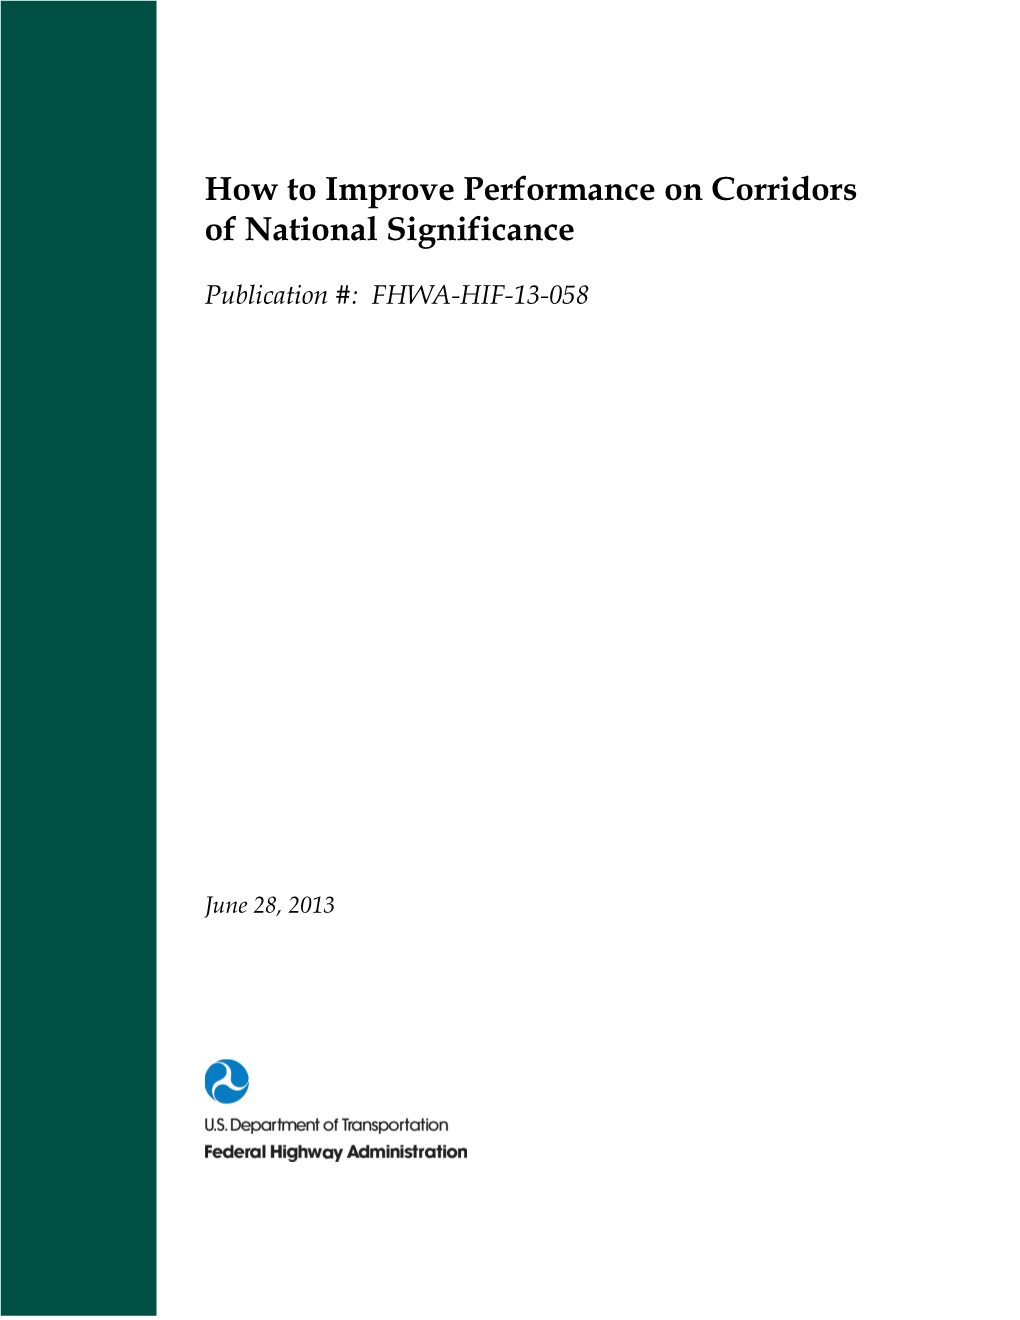 How to Improve Performance on Corridors of National Significance